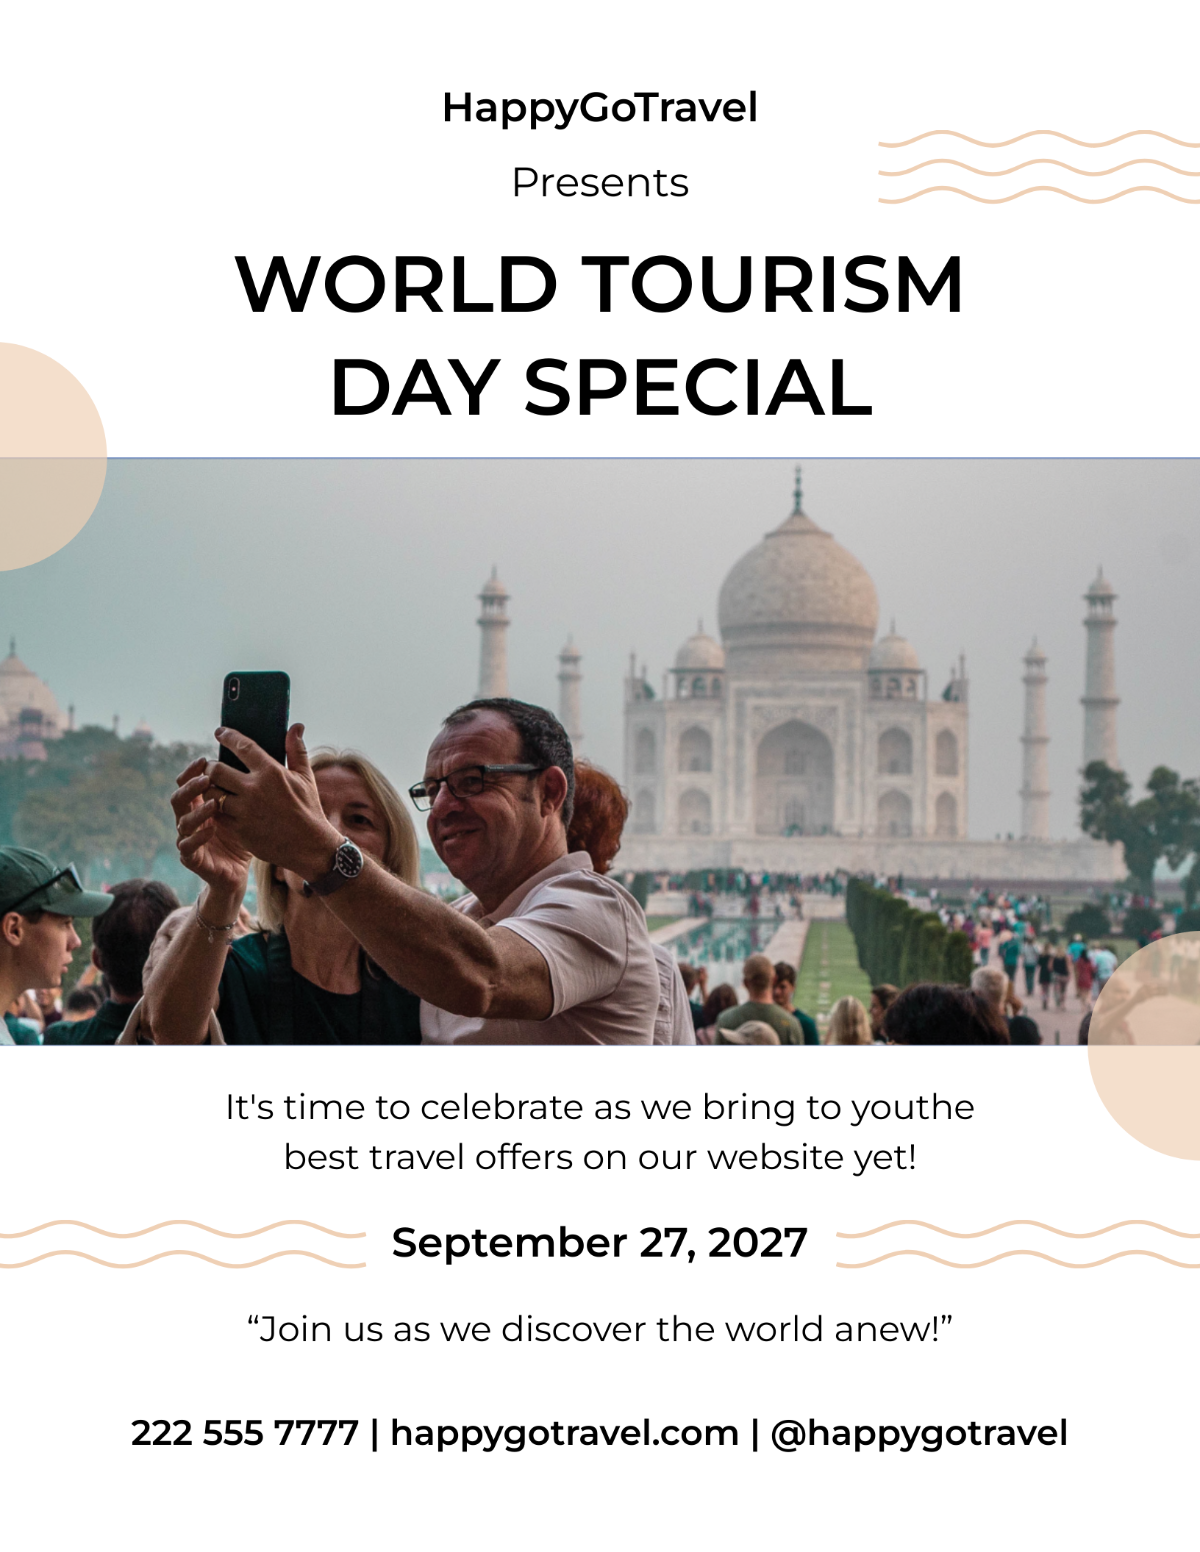 World Tourism Day Flyer Template